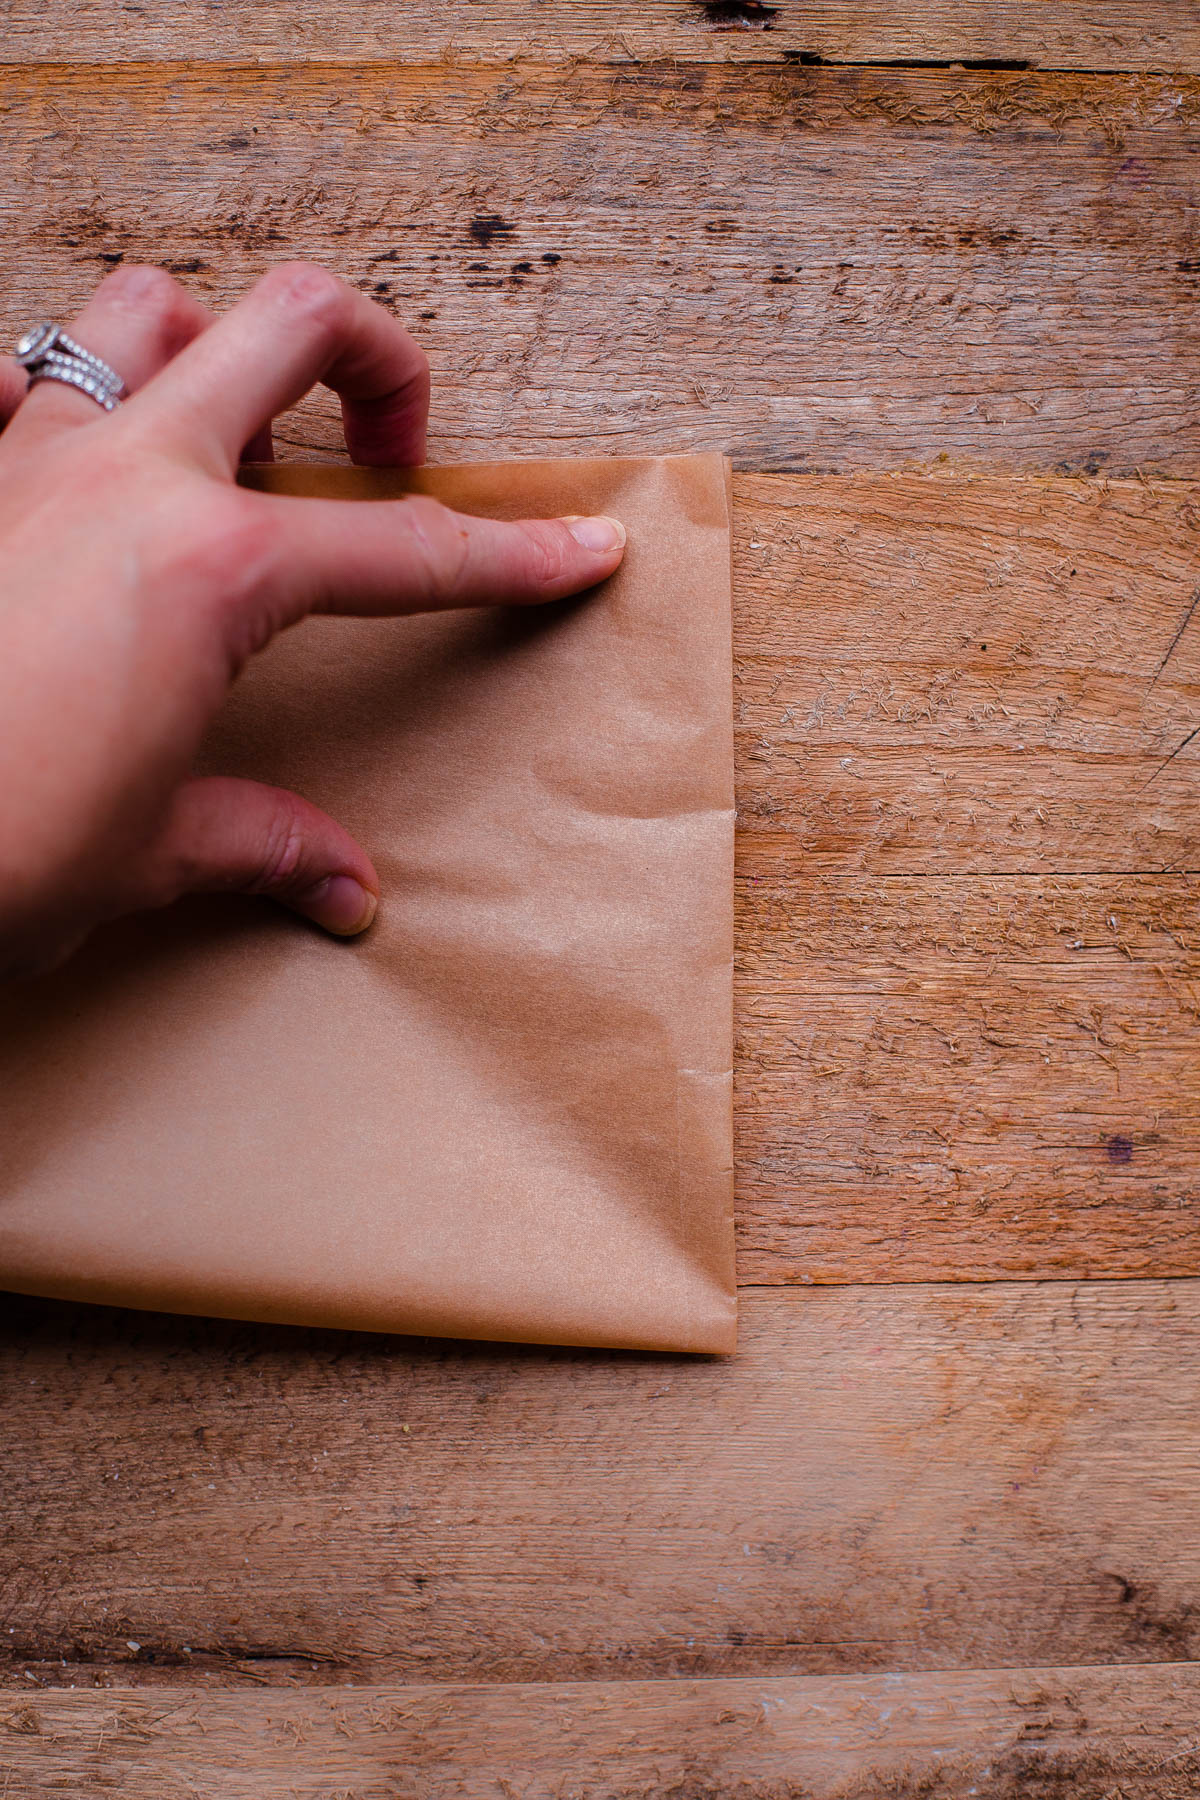 How to Line Any Size Cake Pan with Parchment Paper. This easy kitchen trick makes baking cakes even easier!